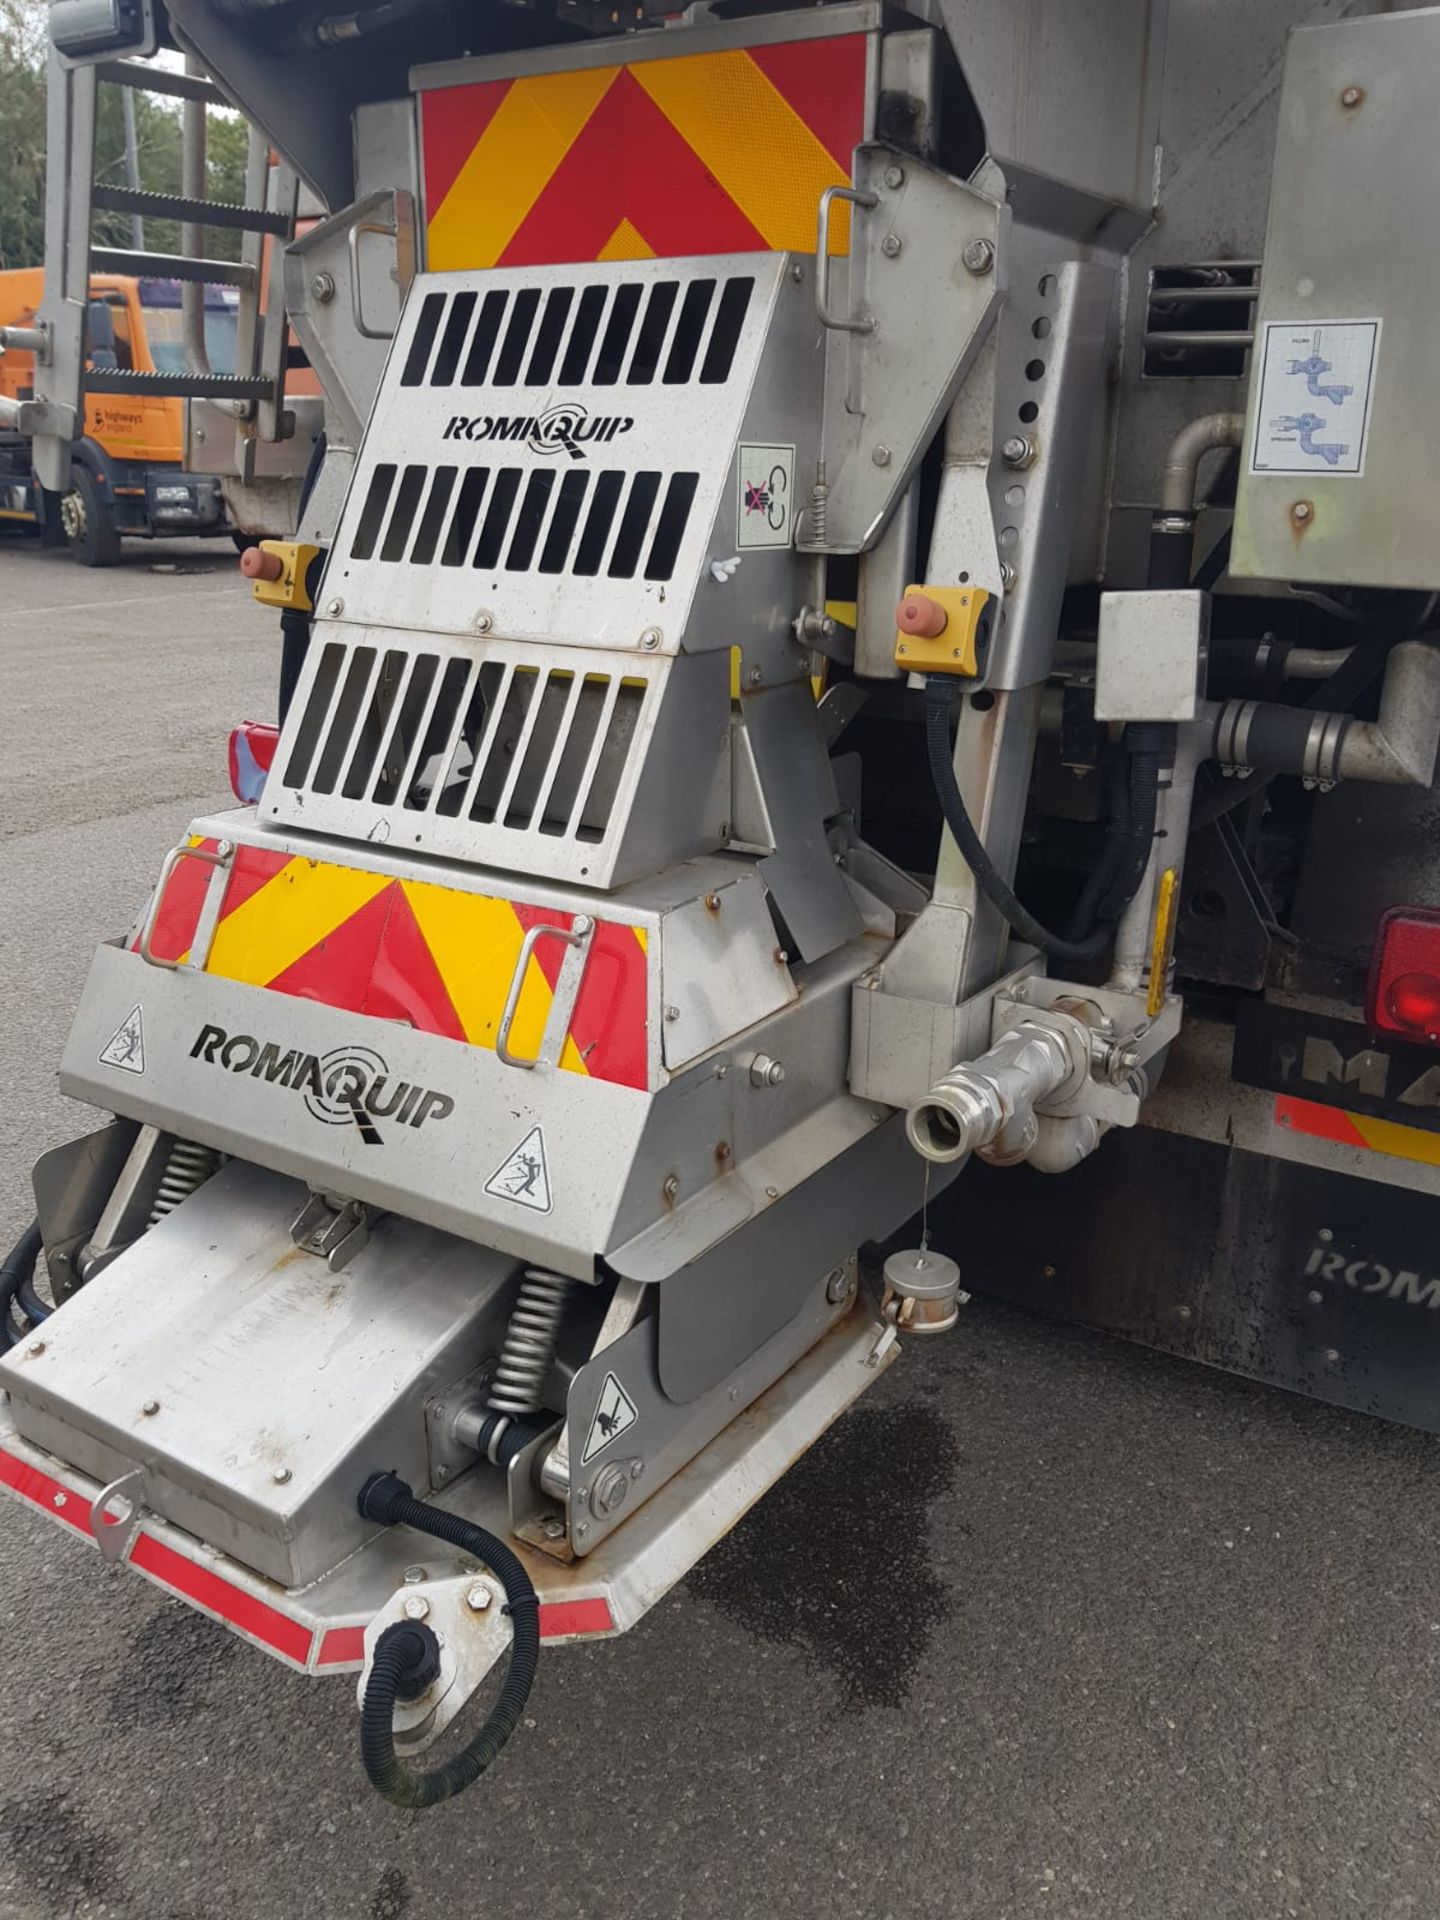 MAN 2009 (reg GN09 OUK) TGM 18.280 4x4 with ROMAQUIP pre-wet gritter mount. - Image 12 of 23